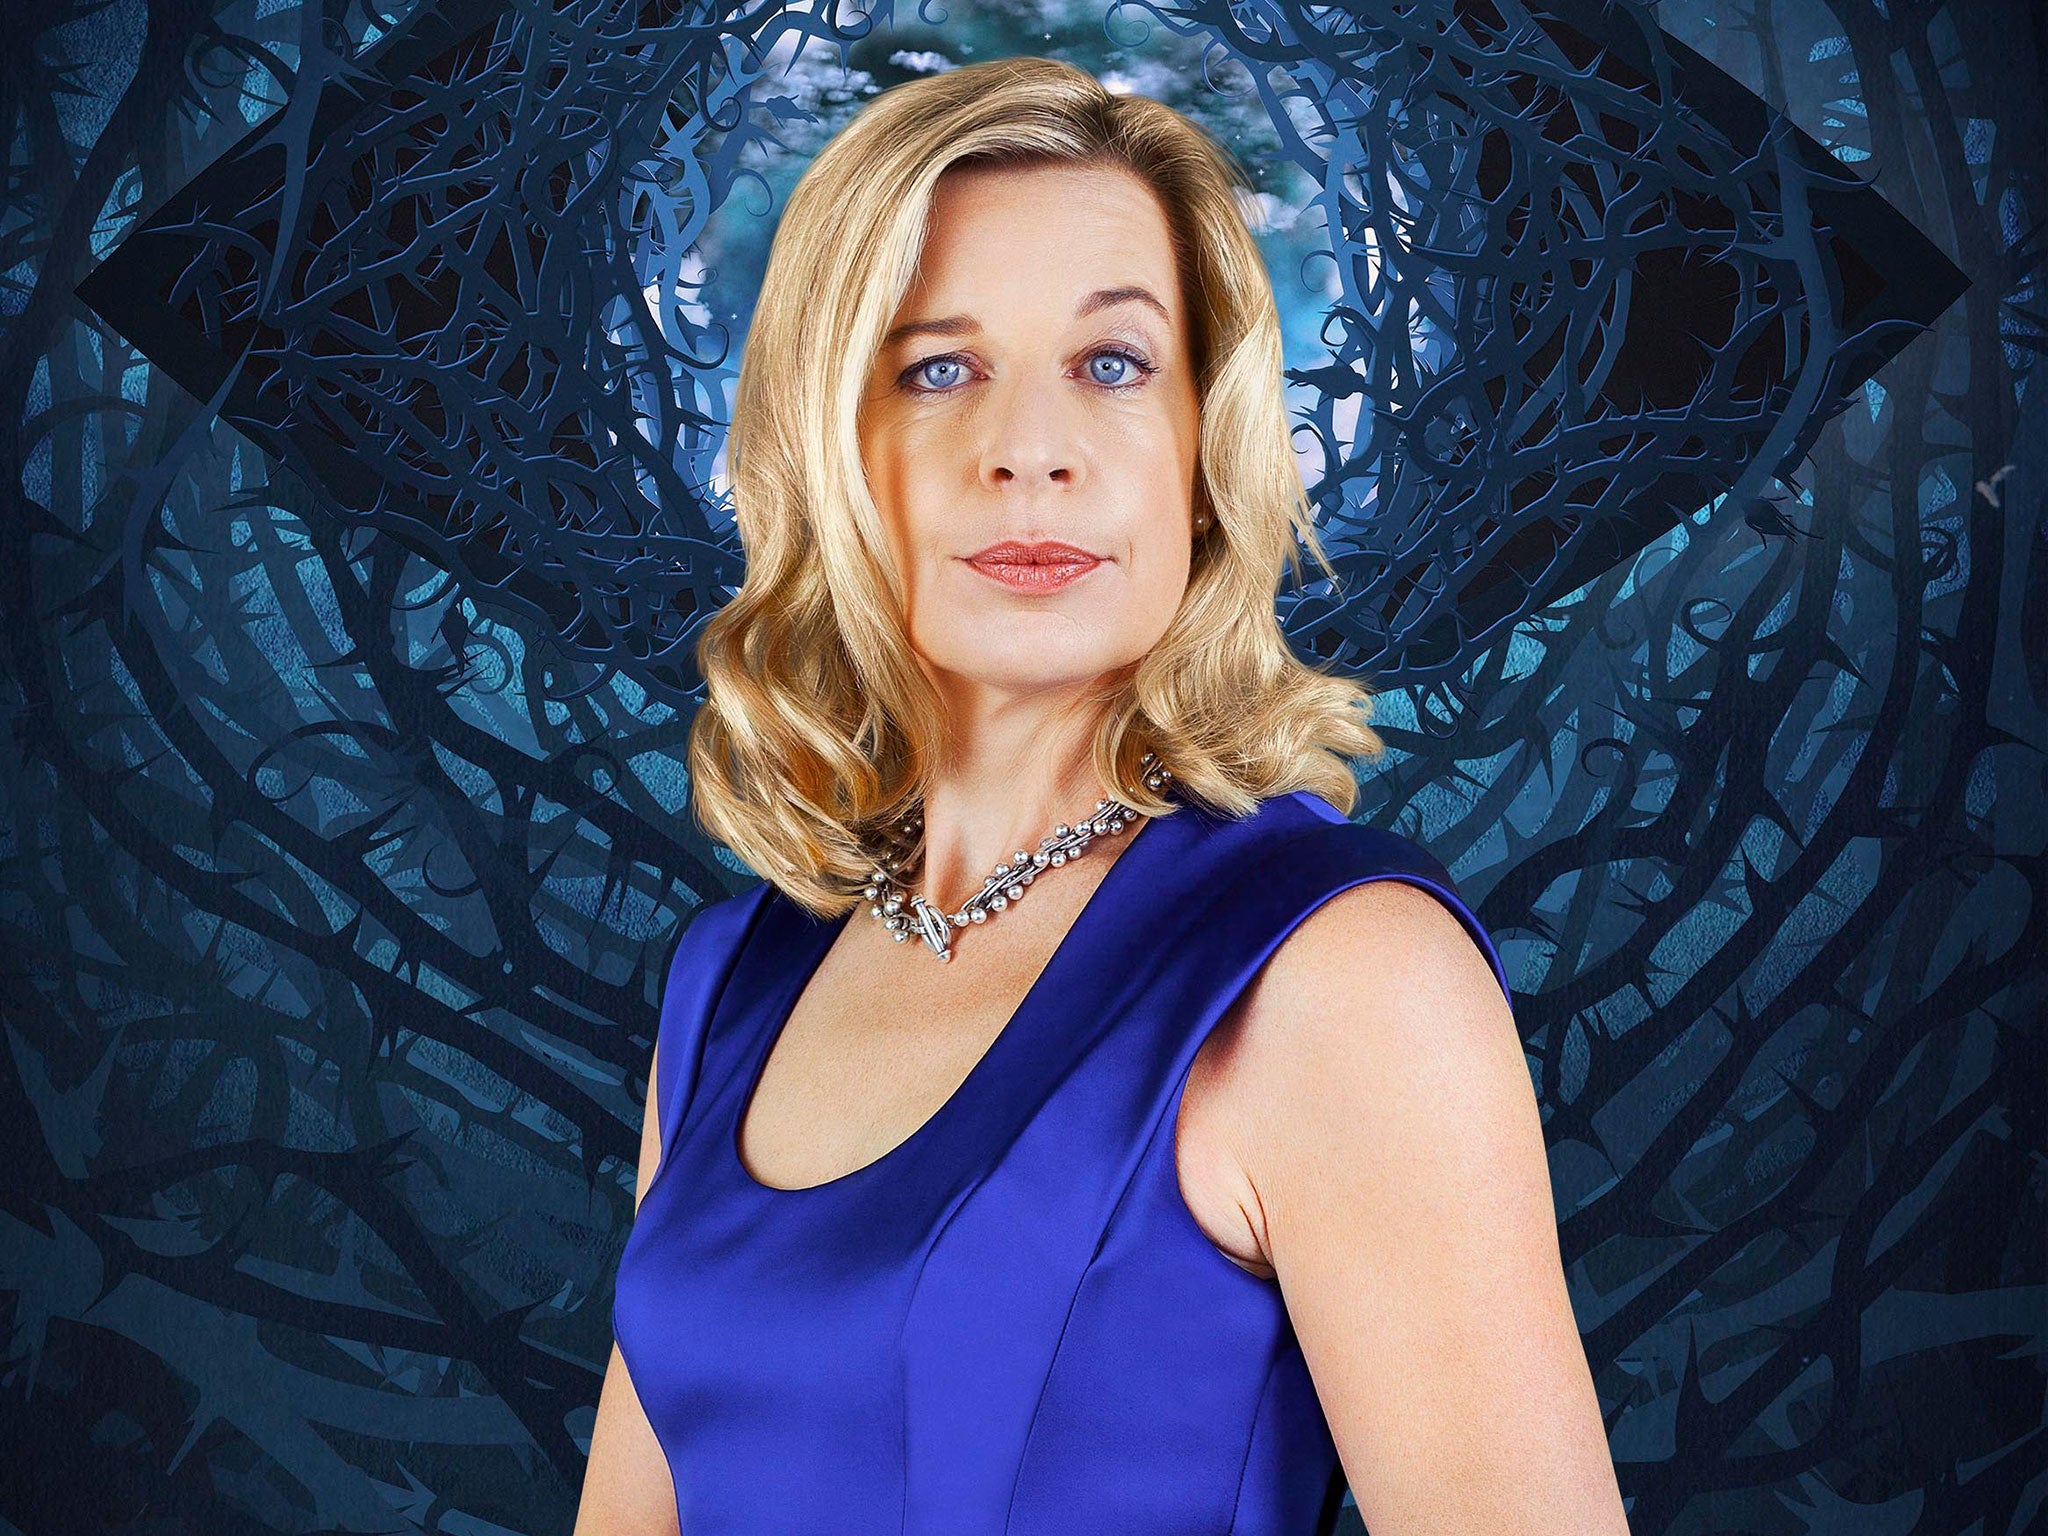 Professional motormouth and columnist for The Sun, Katie Hopkins is taking part in Celebrity Big Brother 2015